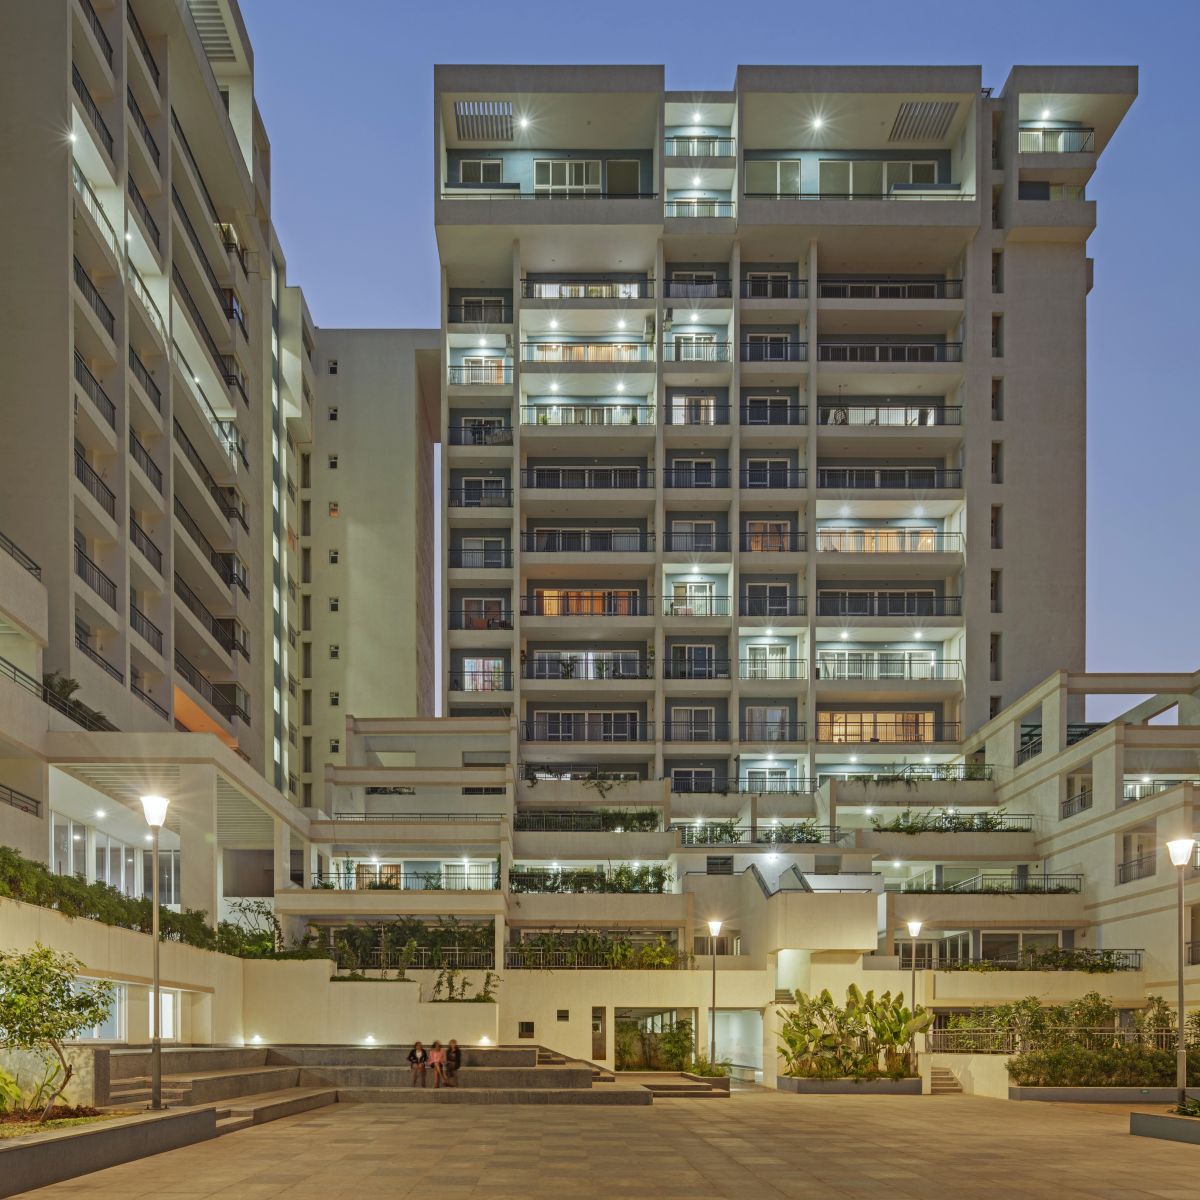 Terraced Residential Highrise, at Nallurhalli Road, Siddhapura, Bangalore, by CnT Architects 22